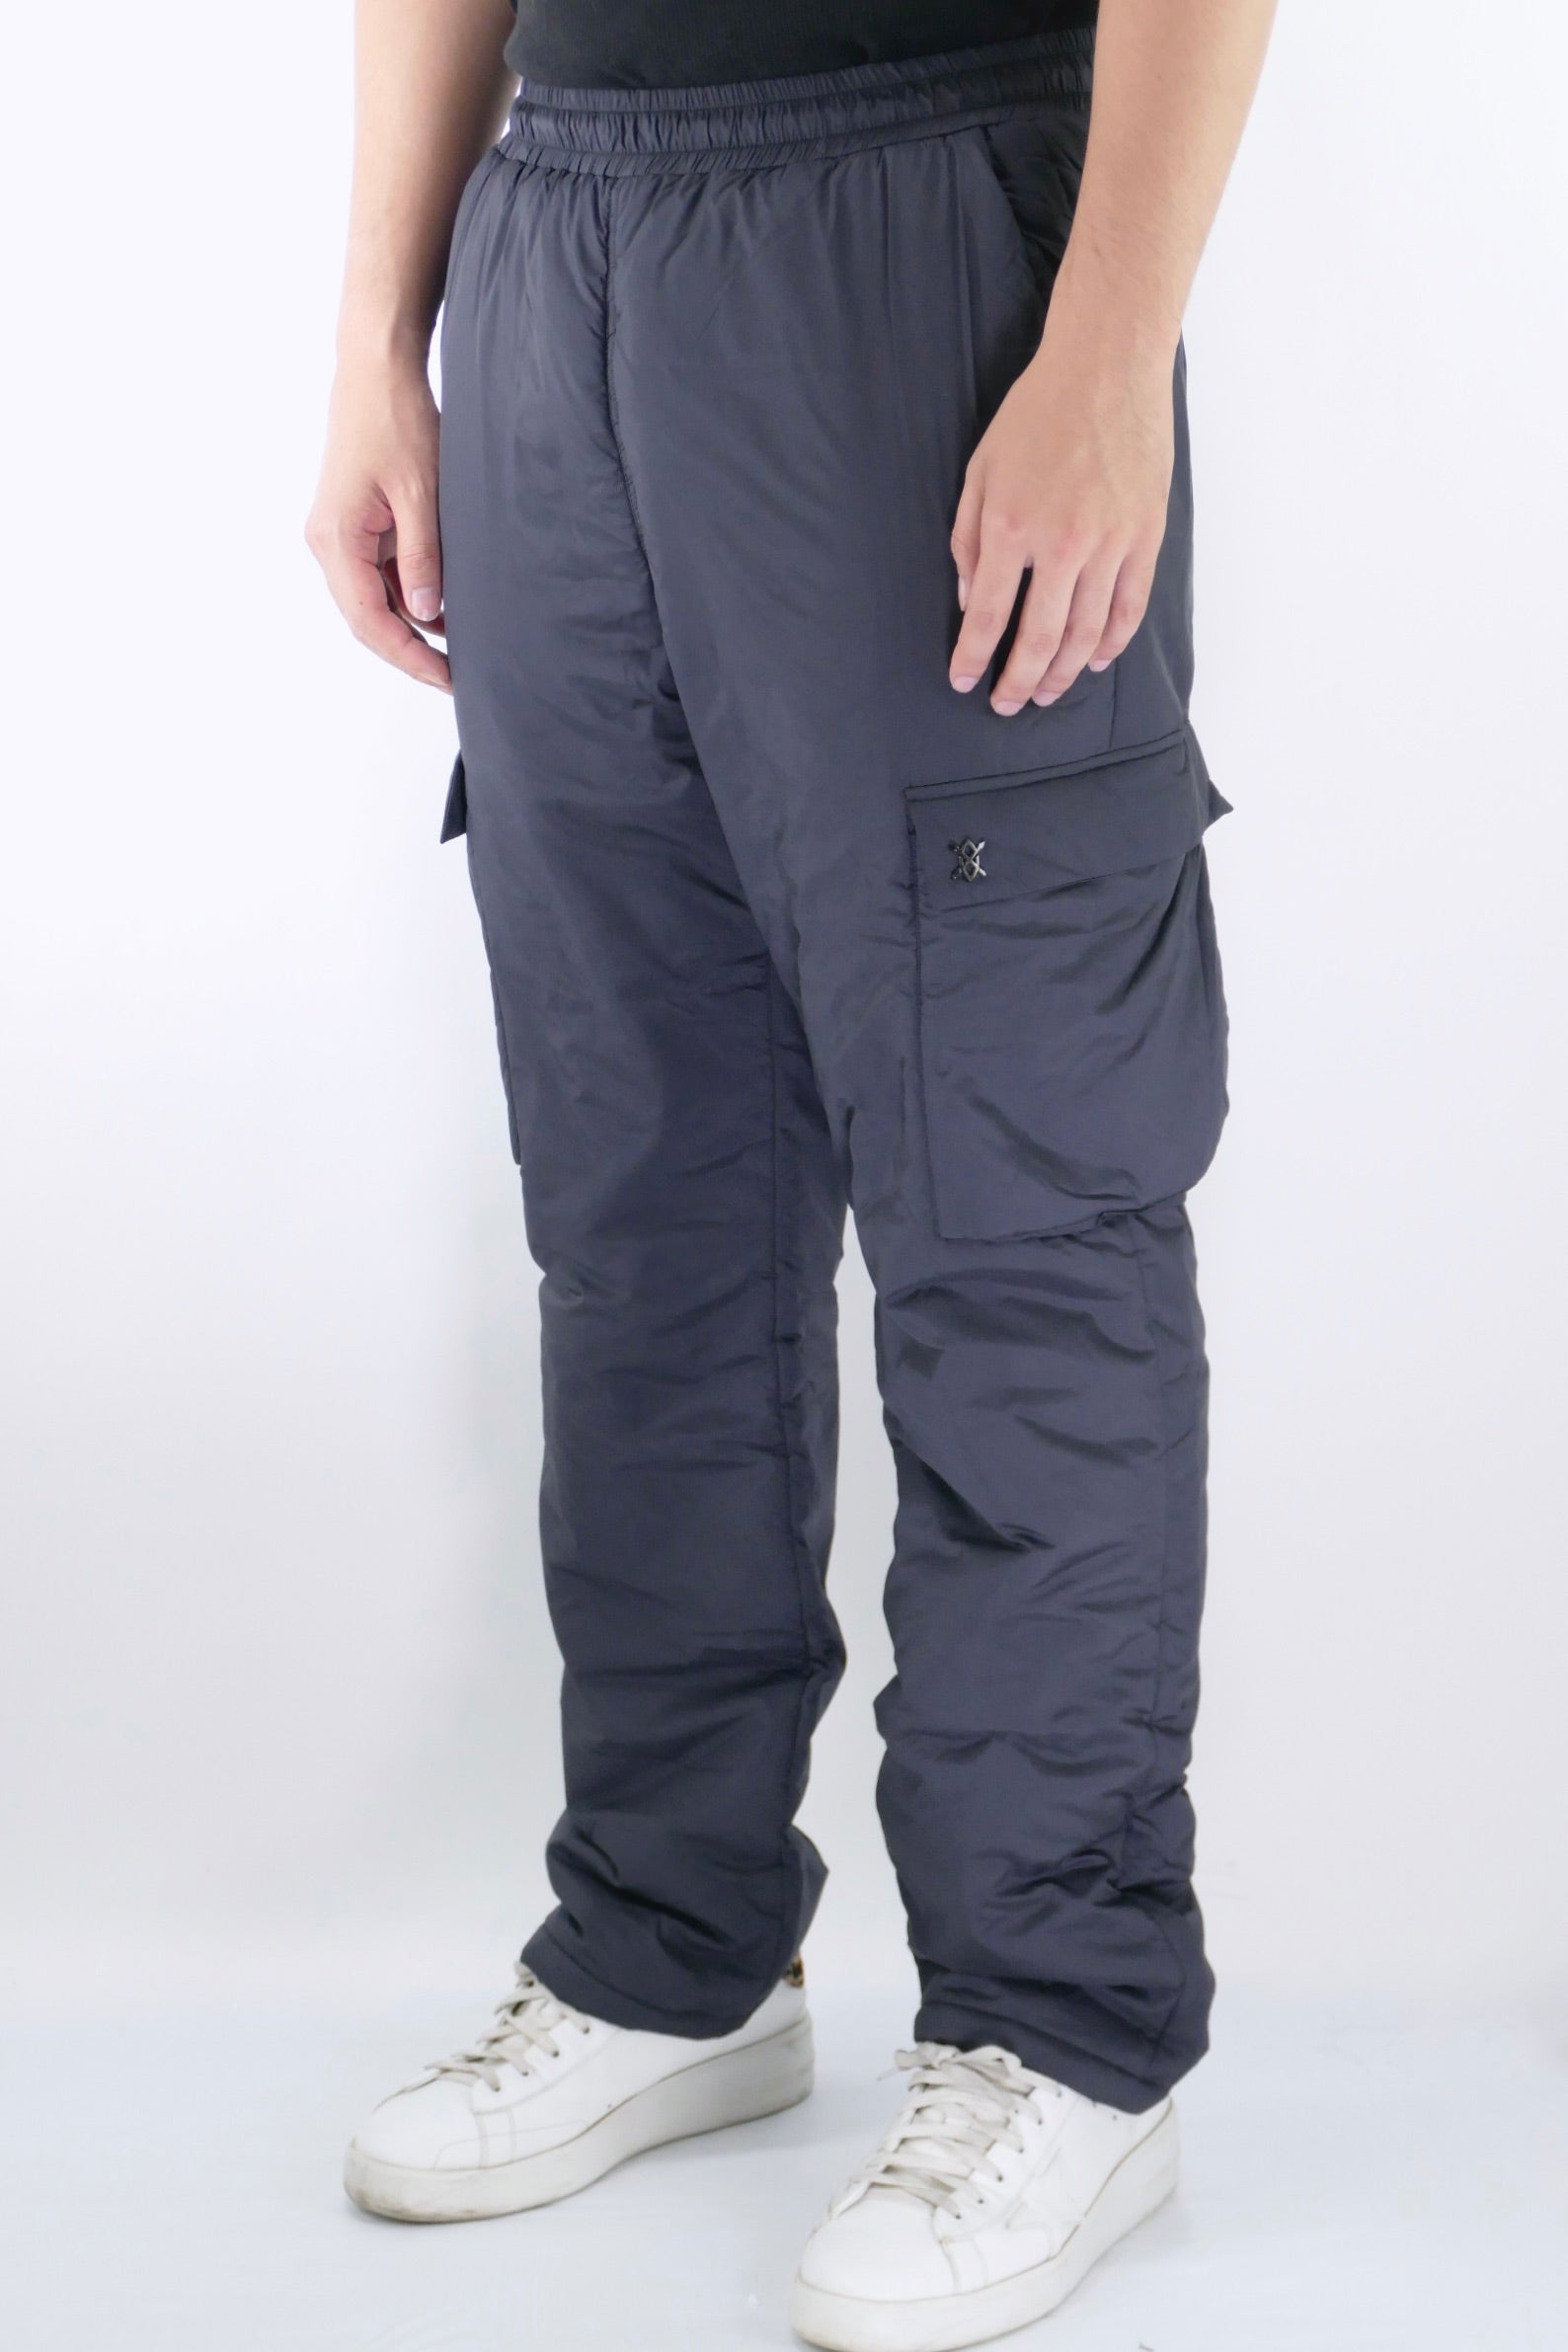 Daily Paper Rondre Padded Pants - Deep Navy - Due West